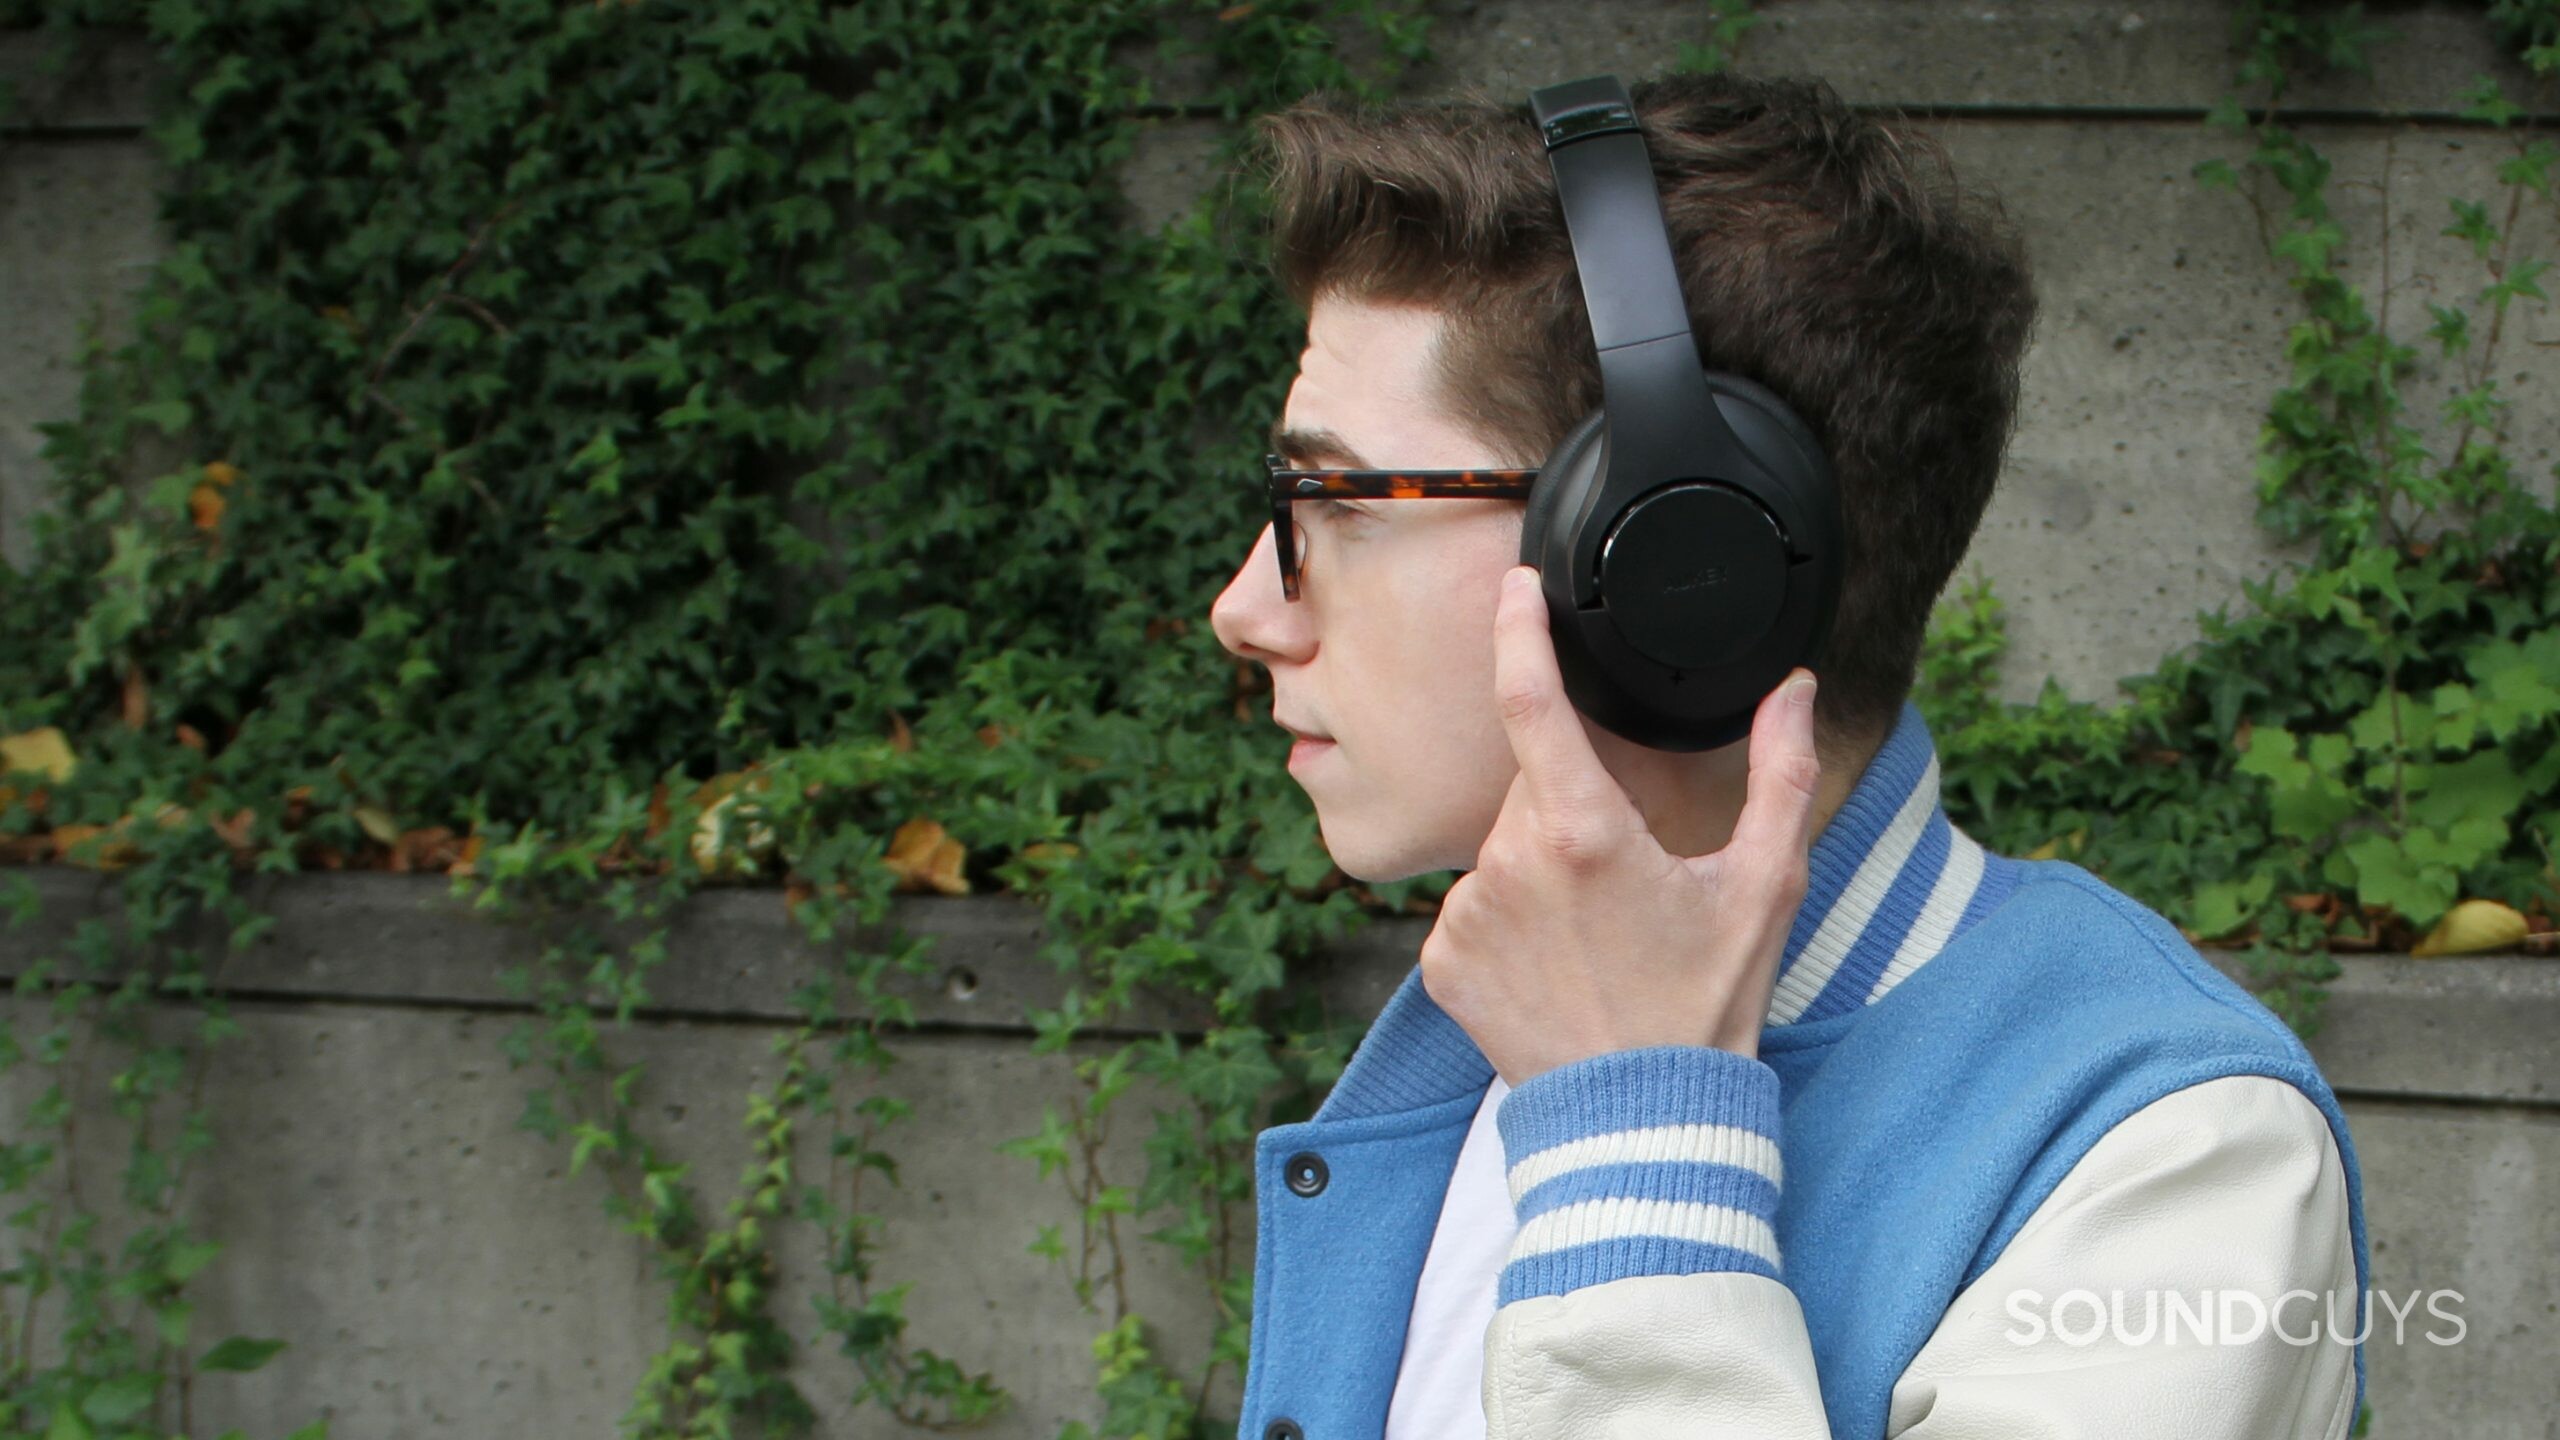 A man stands facing left outside in front of ivy and concrete wearing the Aukey Active Noise Canceling Wireless Headphones, pressing a button on the ear cup.